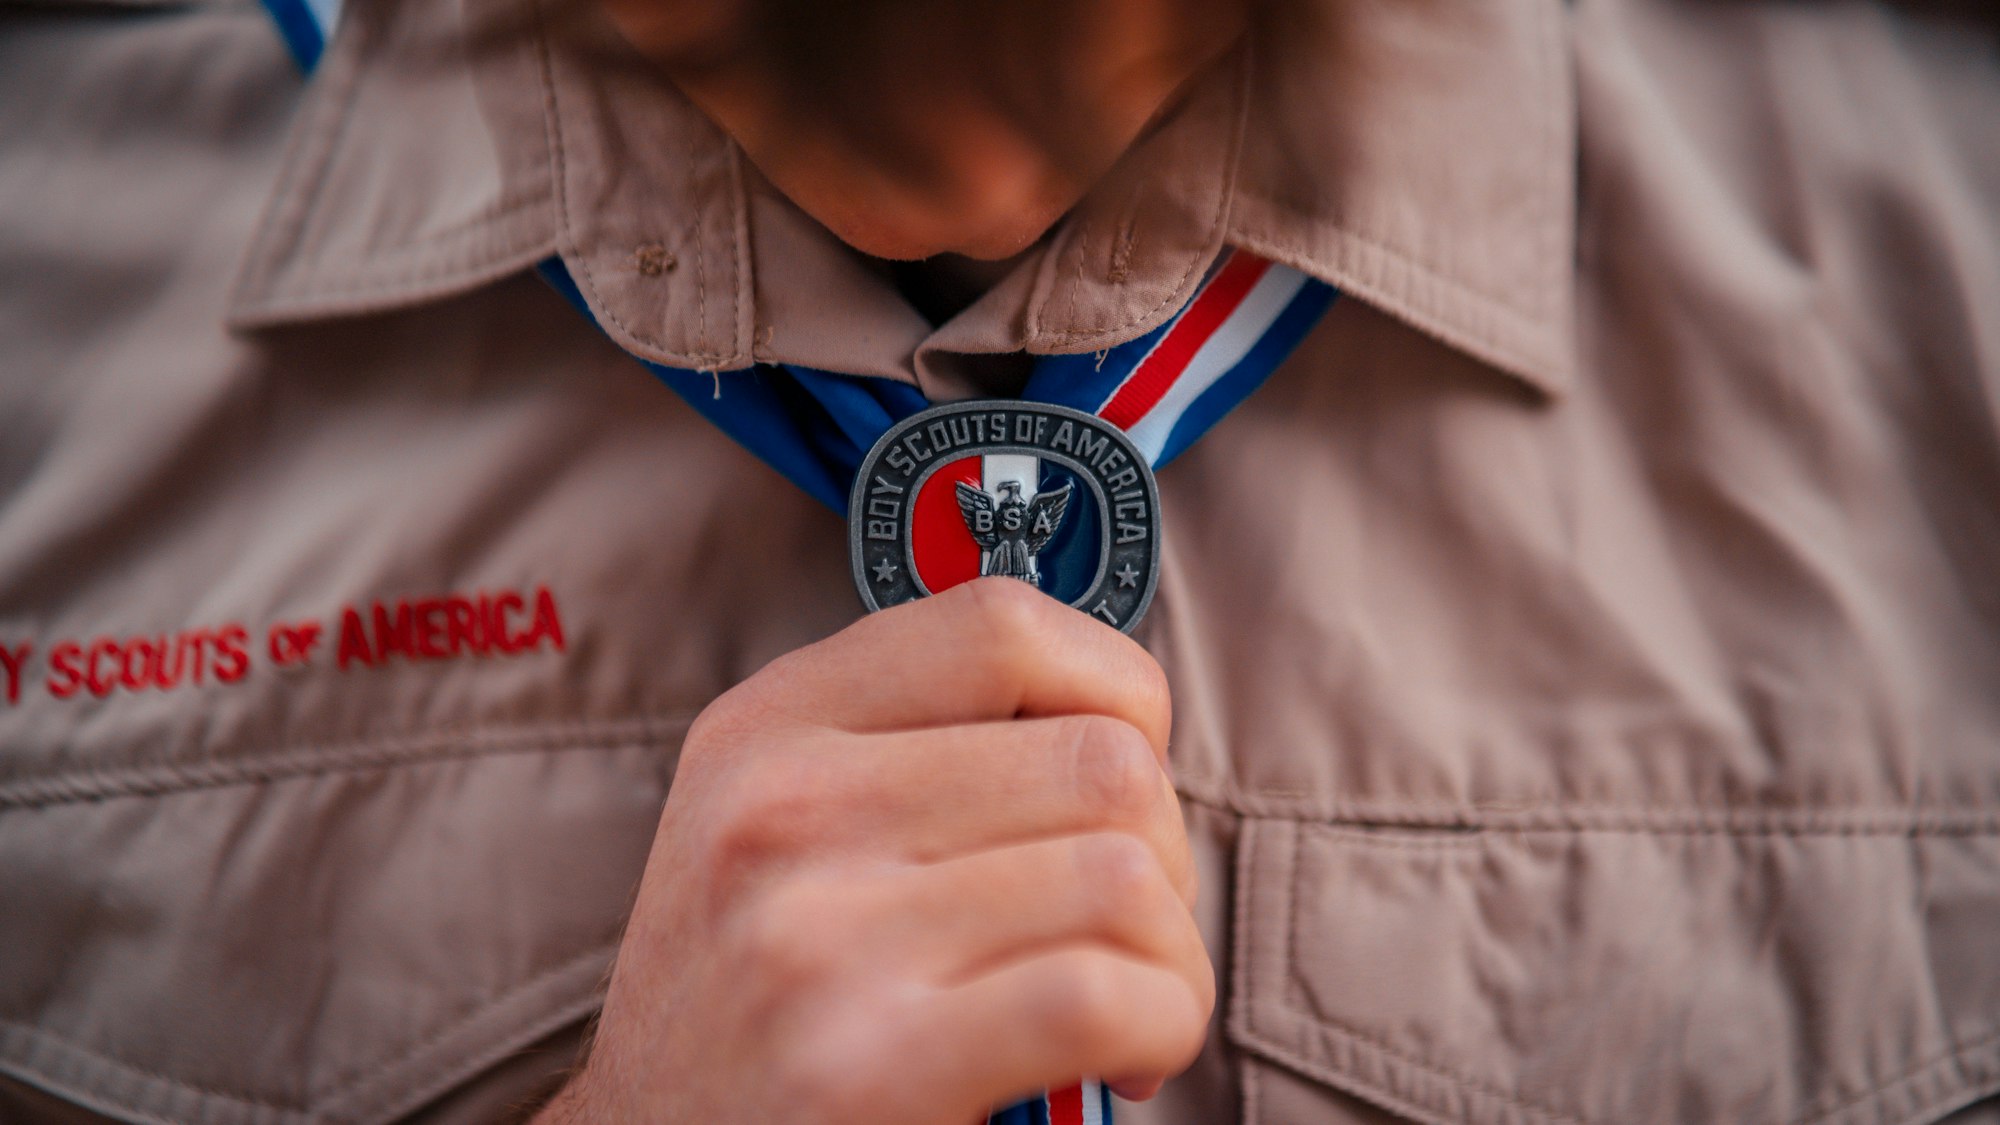 When Were The Boy Scouts Formed?